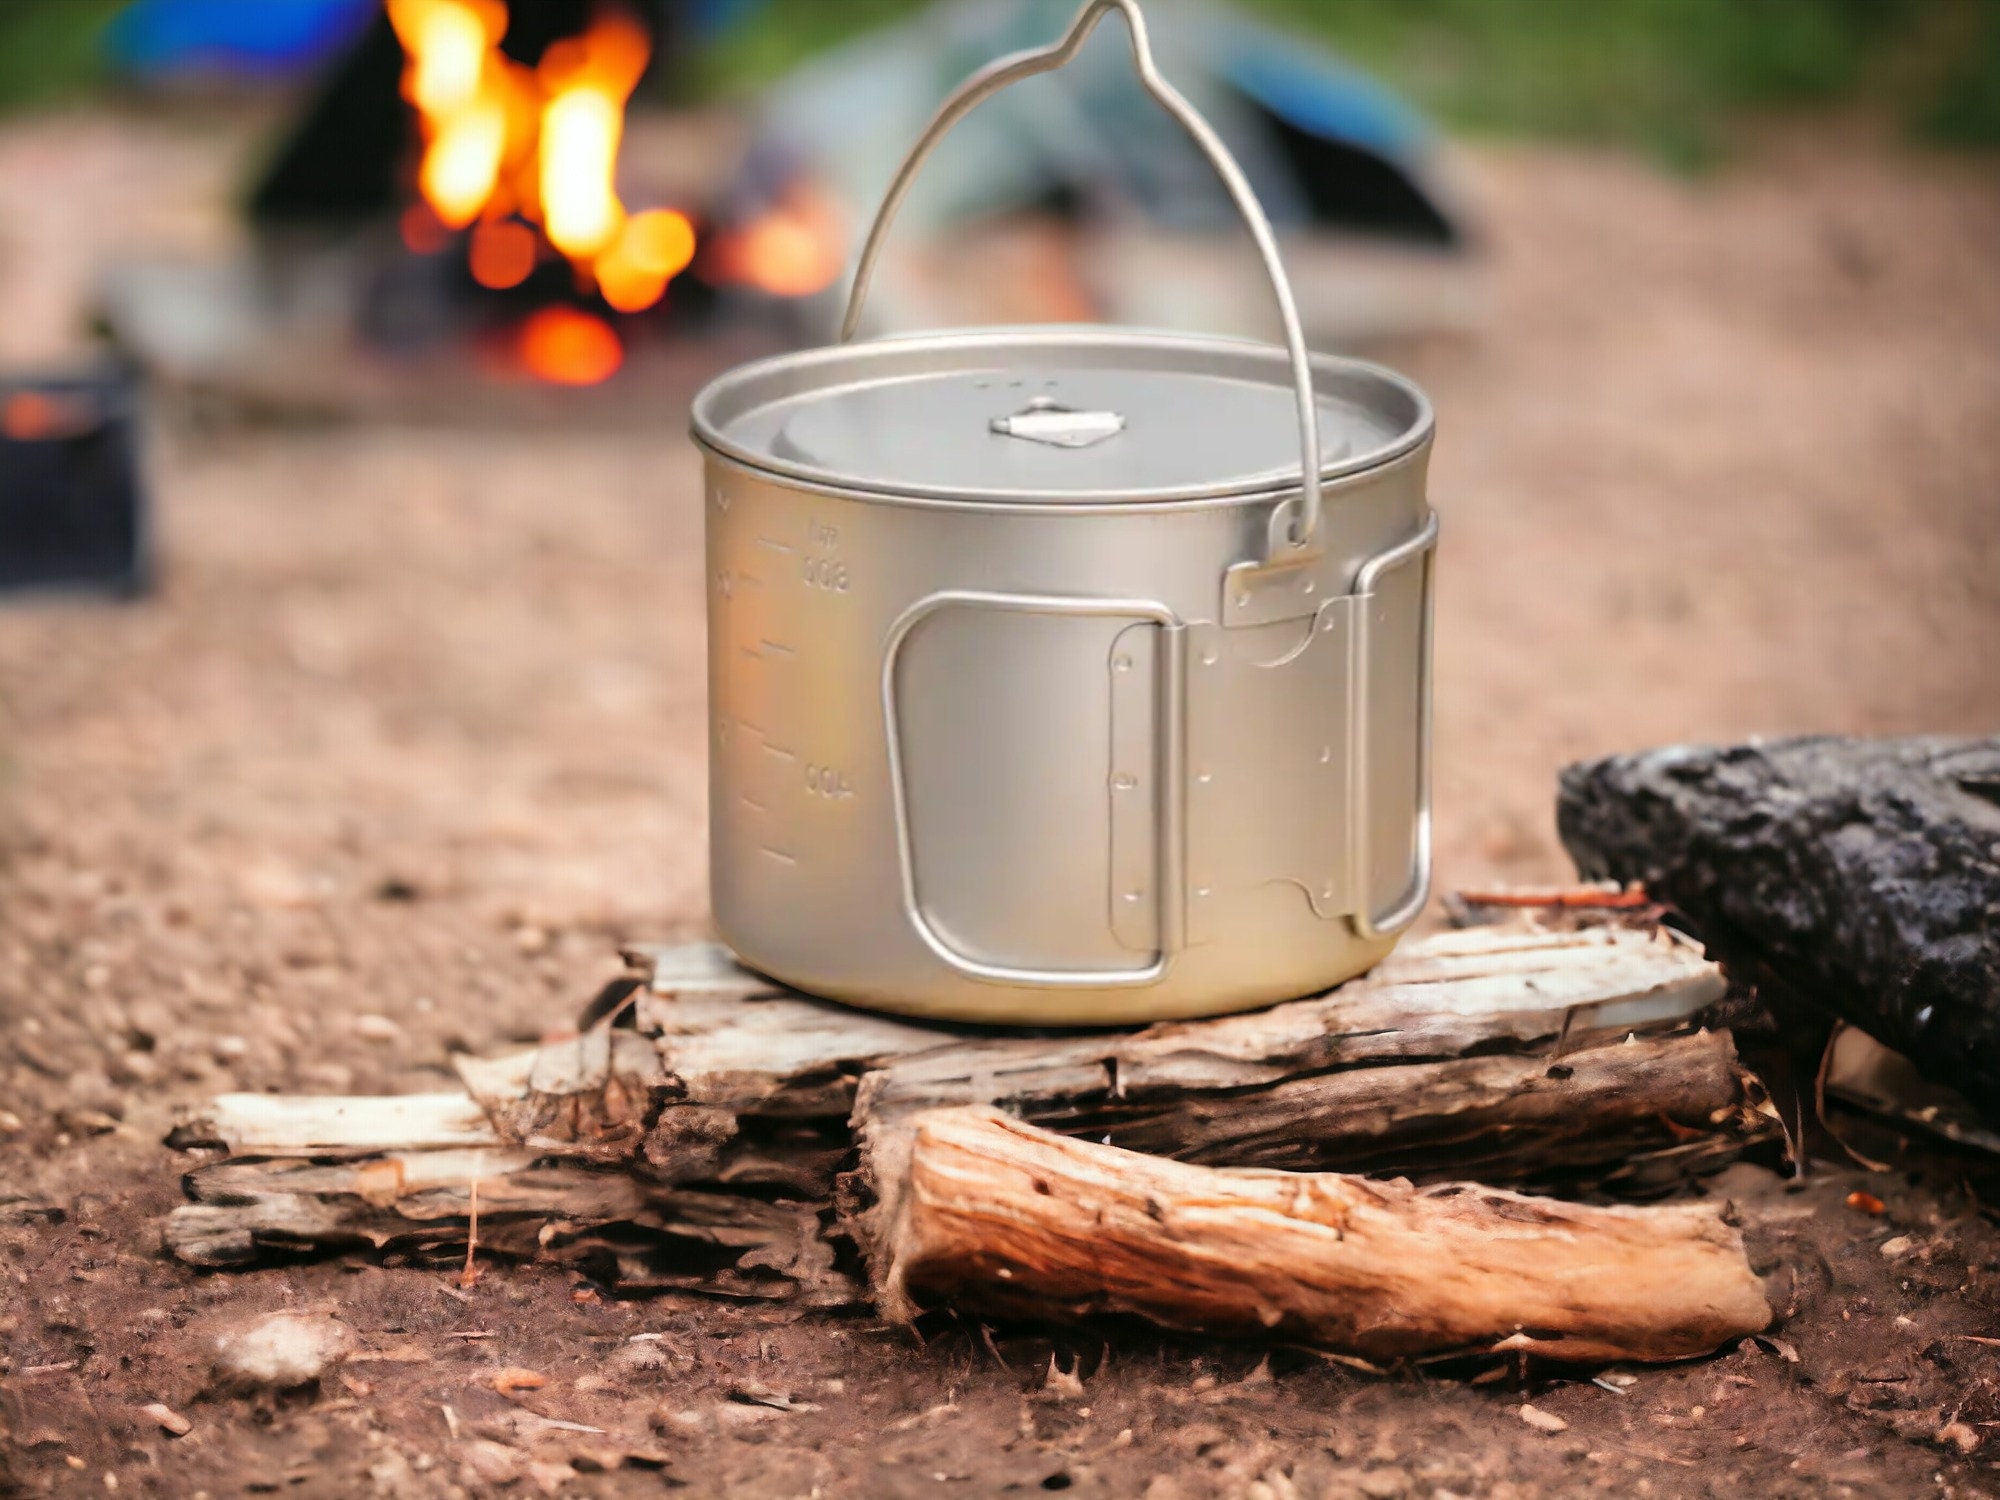 Adventure Cook Set For Four, 2.6 QT Camping Cookware